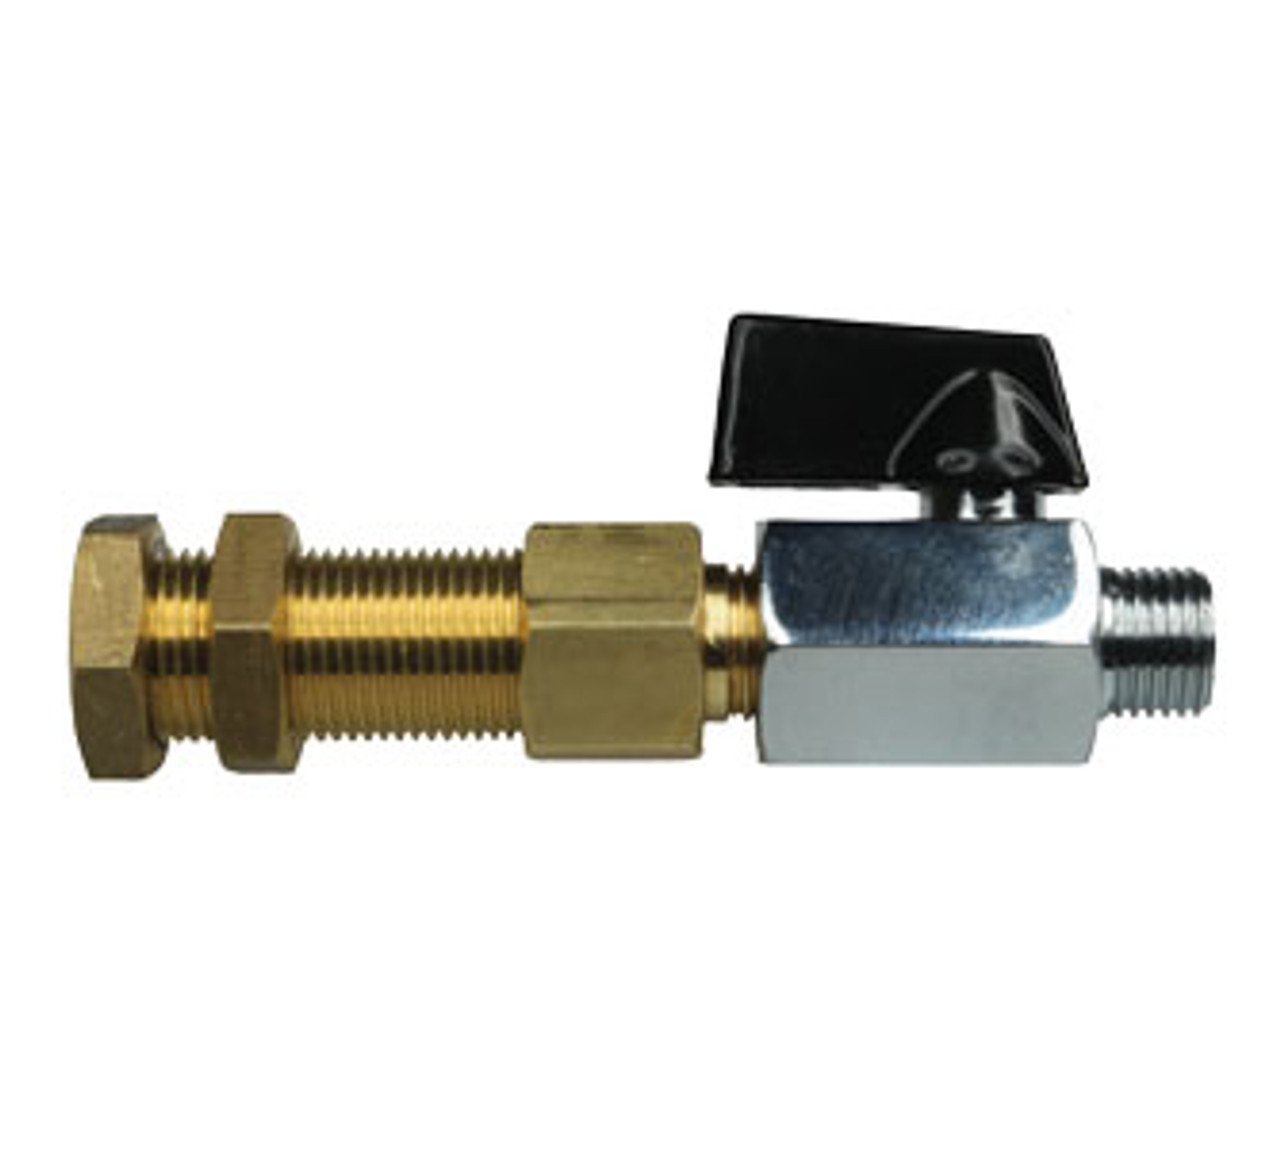 Drain Adapter Kit with ball valve (Male) 1/4"